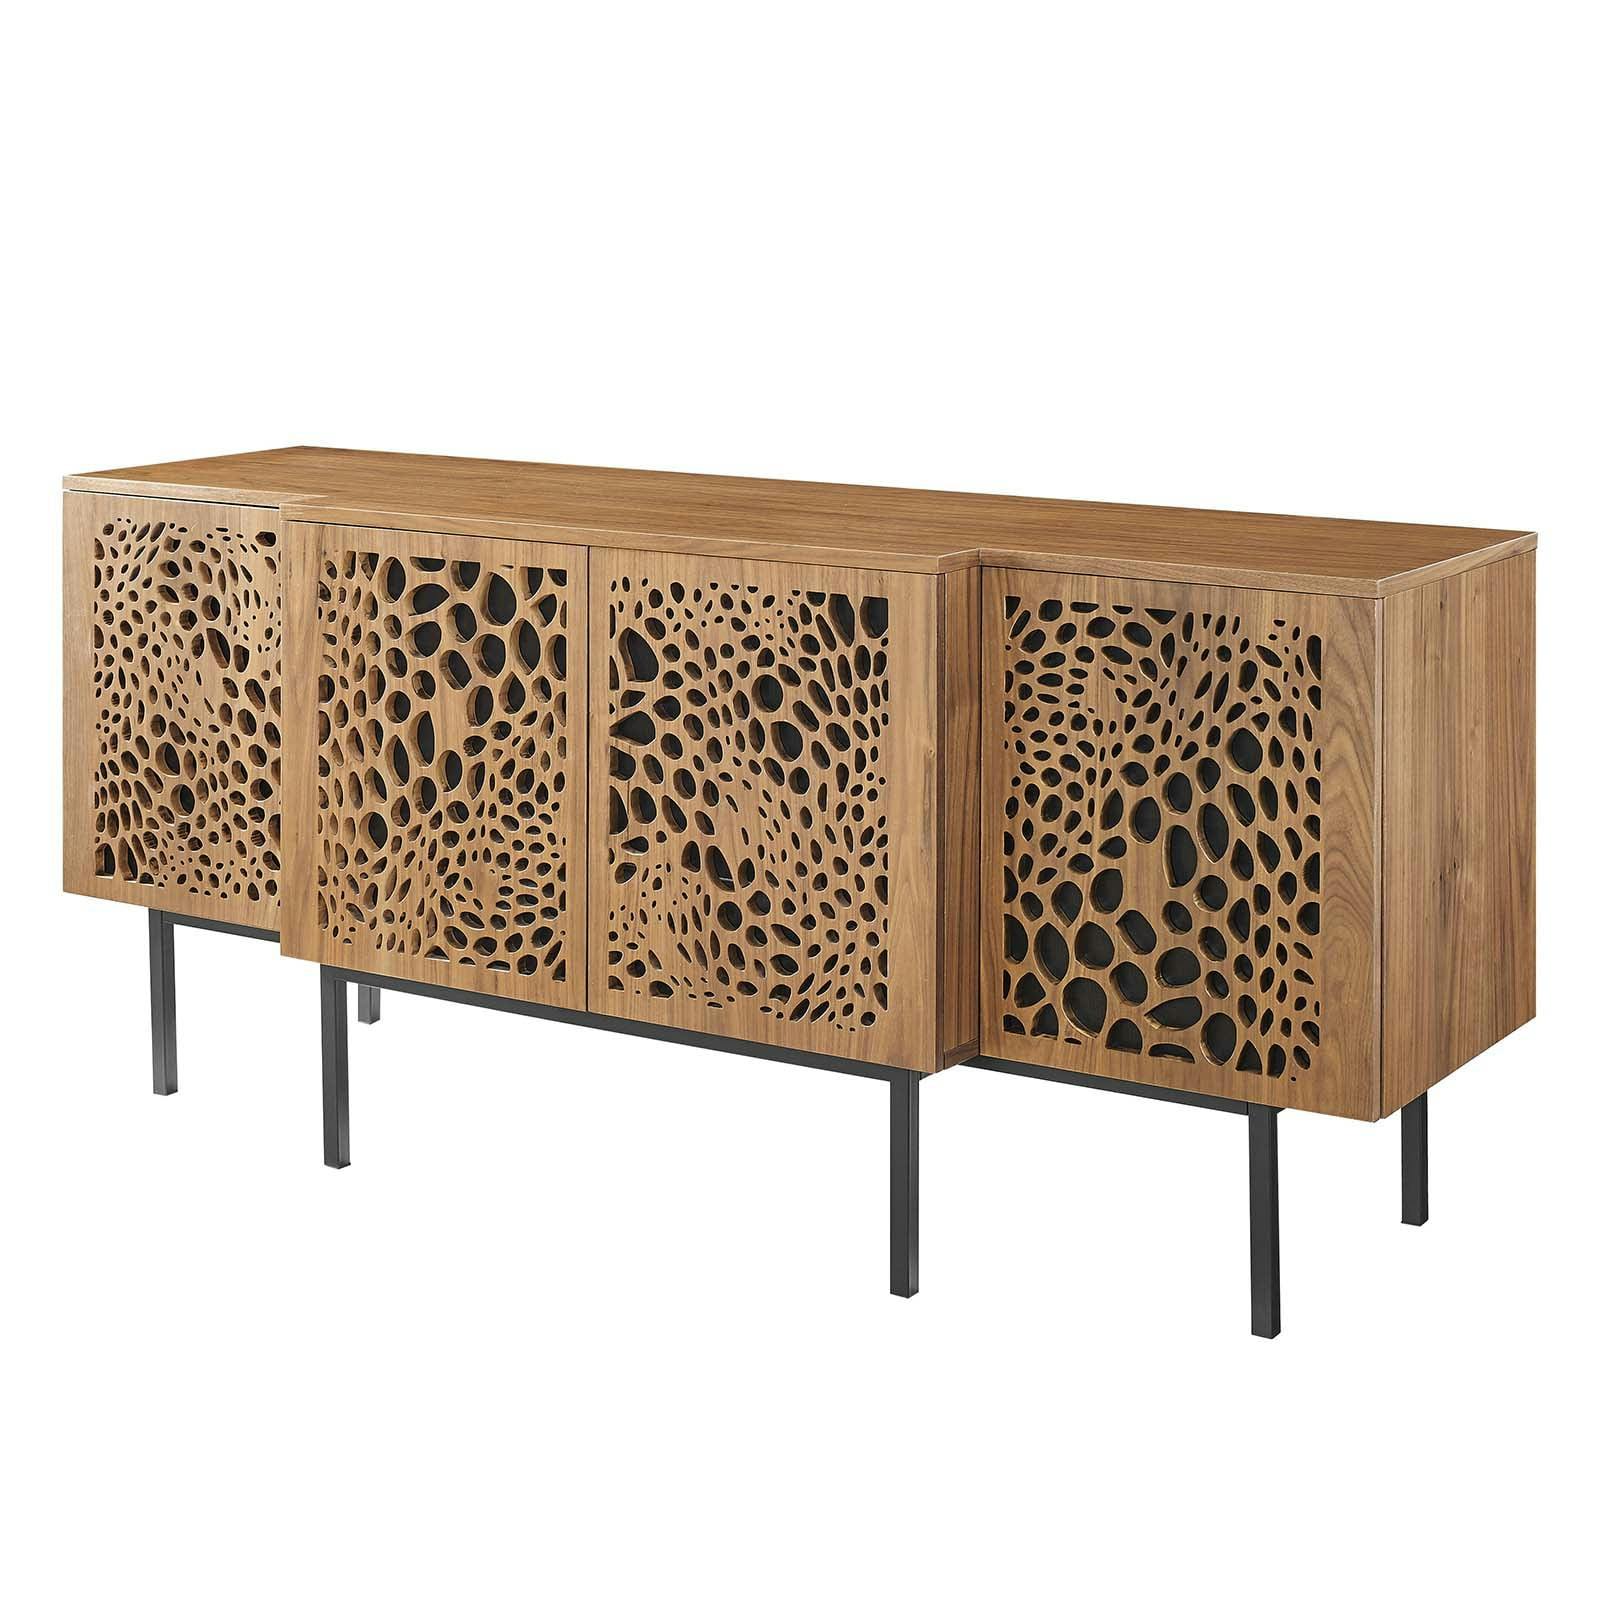 Aspen Walnut Wood Sideboard with Modern Iron Accents